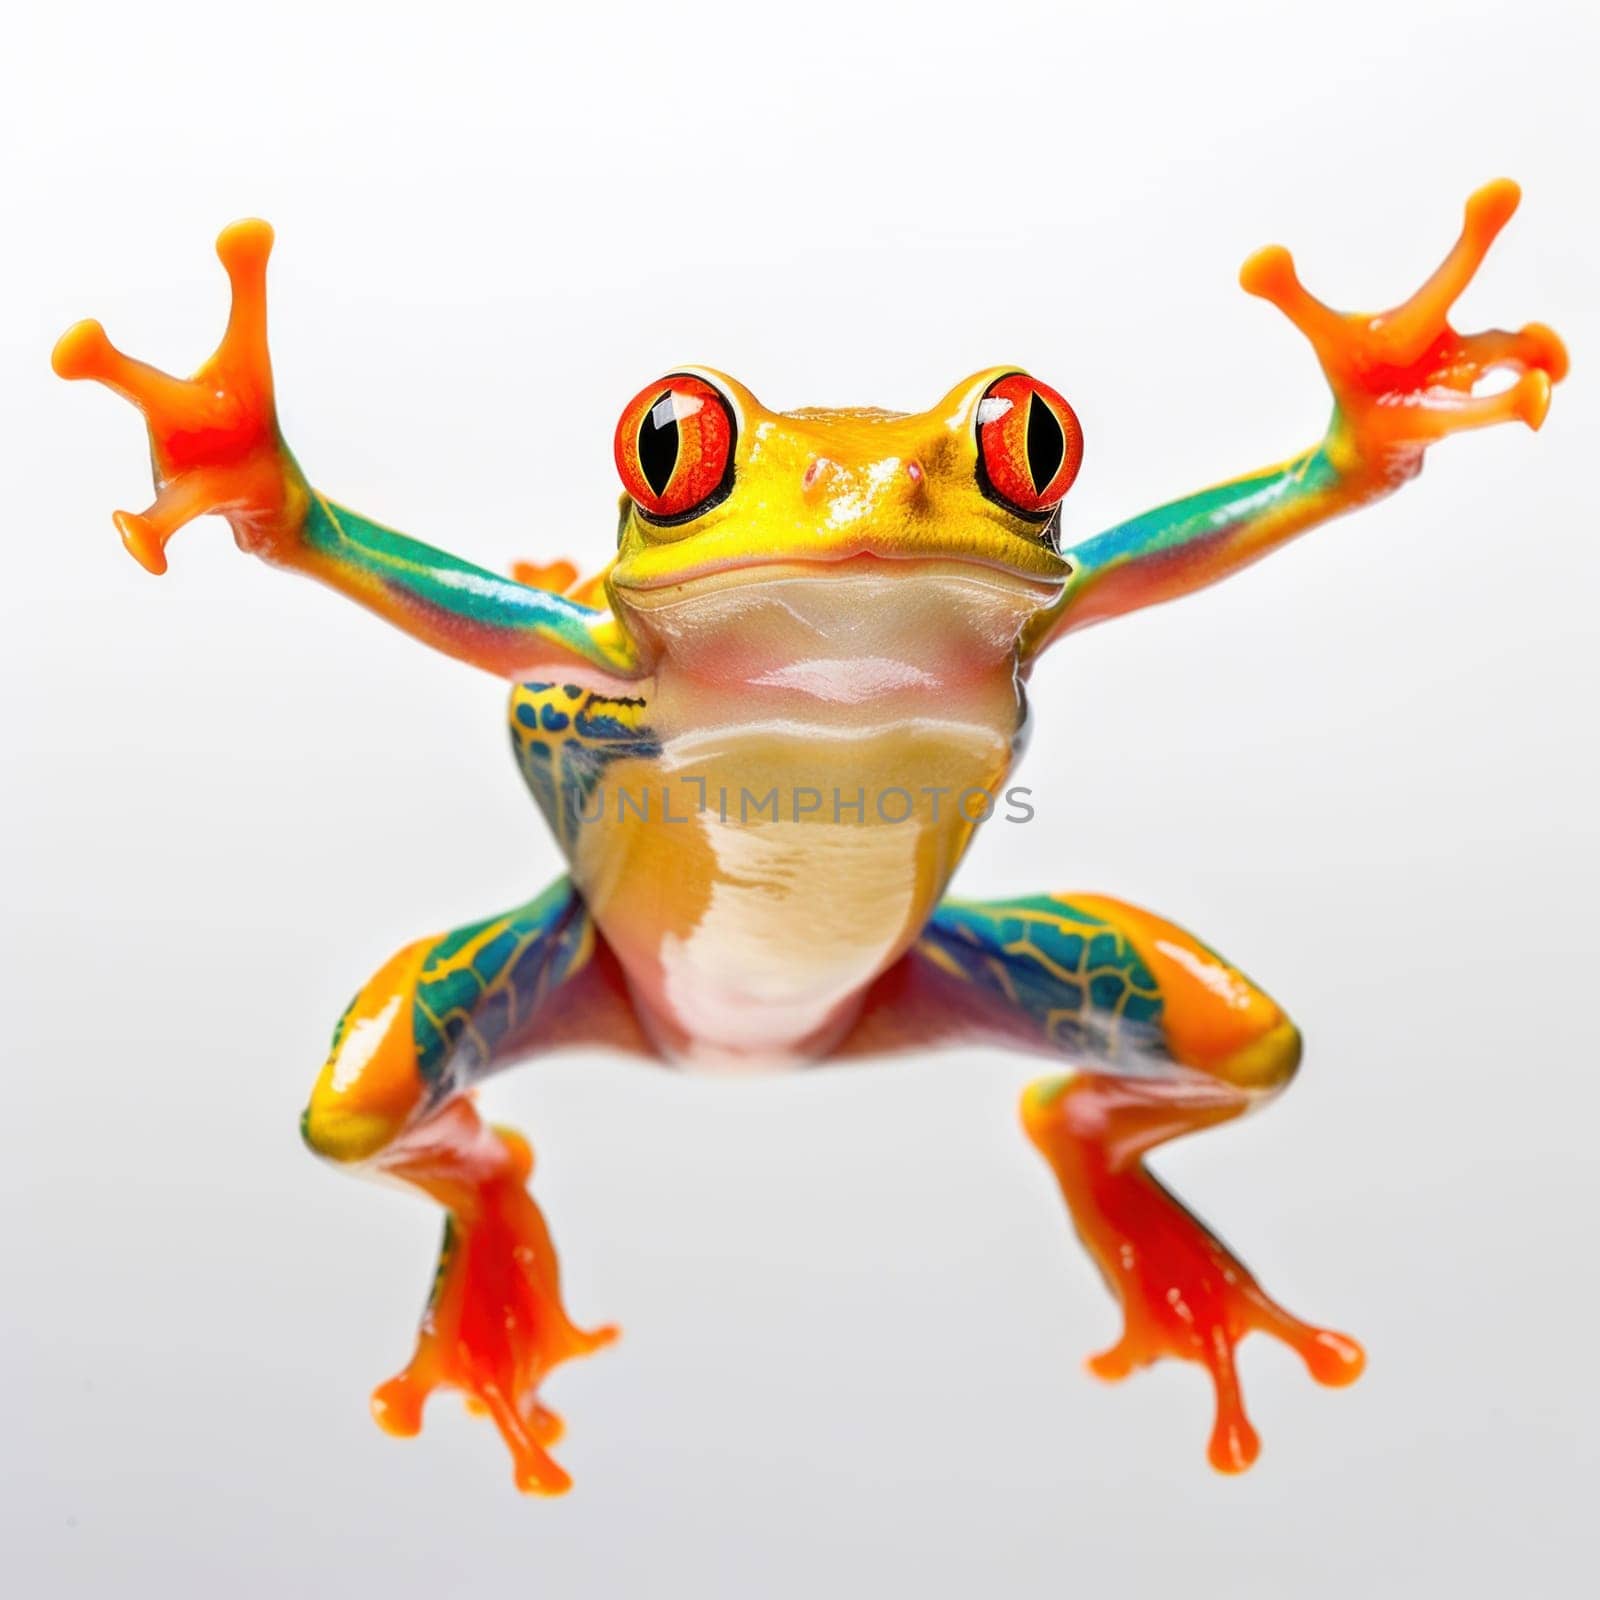 A colorful frog with red eyes and orange legs jumping in the air, AI by starush